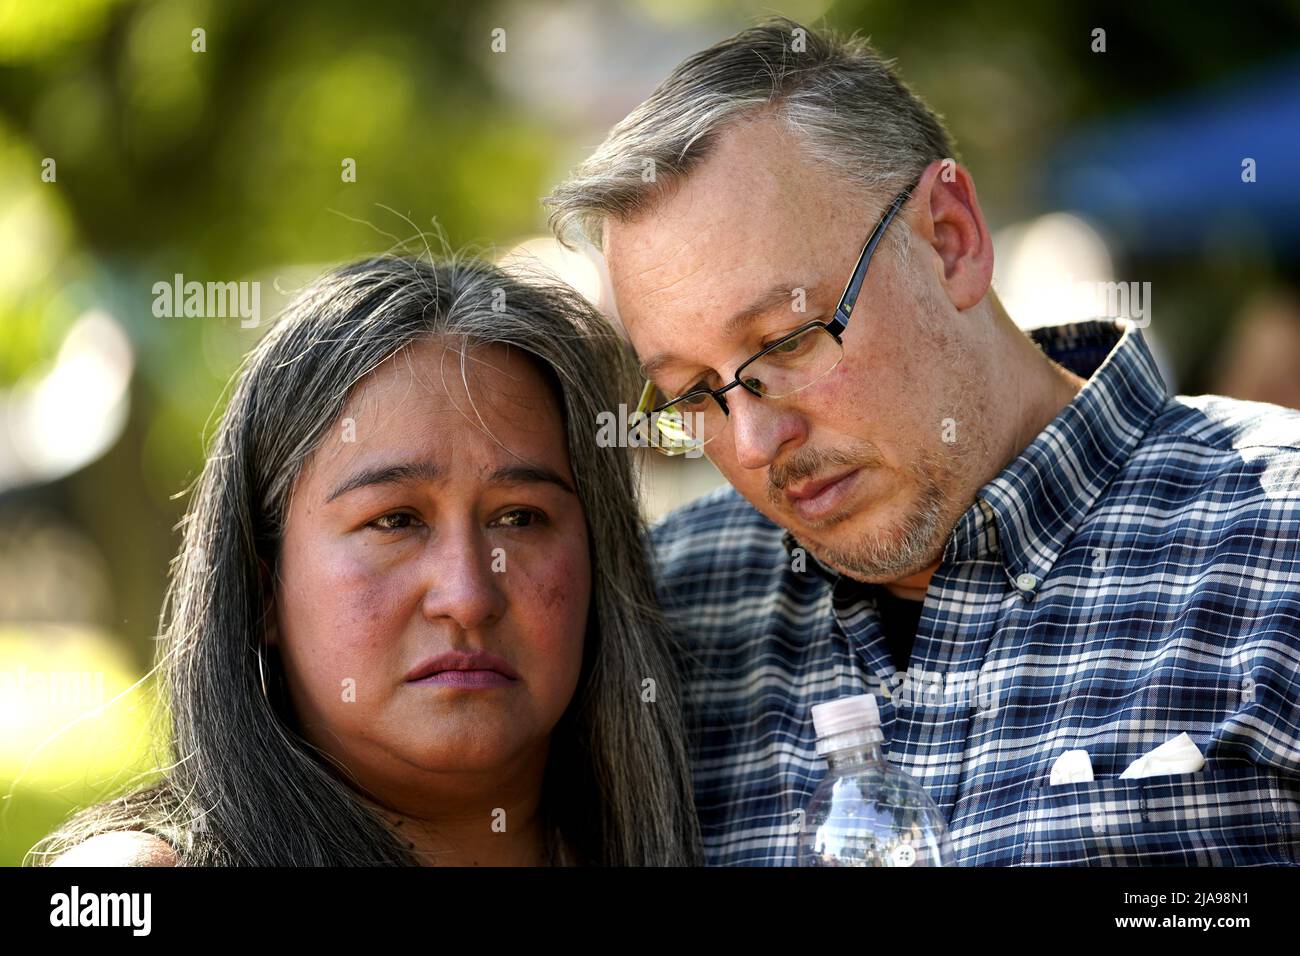 Uvalde, USA. 28th May, 2022. People mourn for victims of a school mass shooting at Town Square in Uvalde, Texas, the United States, May 28, 2022. At least 19 children and two adults were killed in a shooting at Robb Elementary School in the town of Uvalde, Texas, on Tuesday. Credit: Wu Xiaoling/Xinhua/Alamy Live News Stock Photo